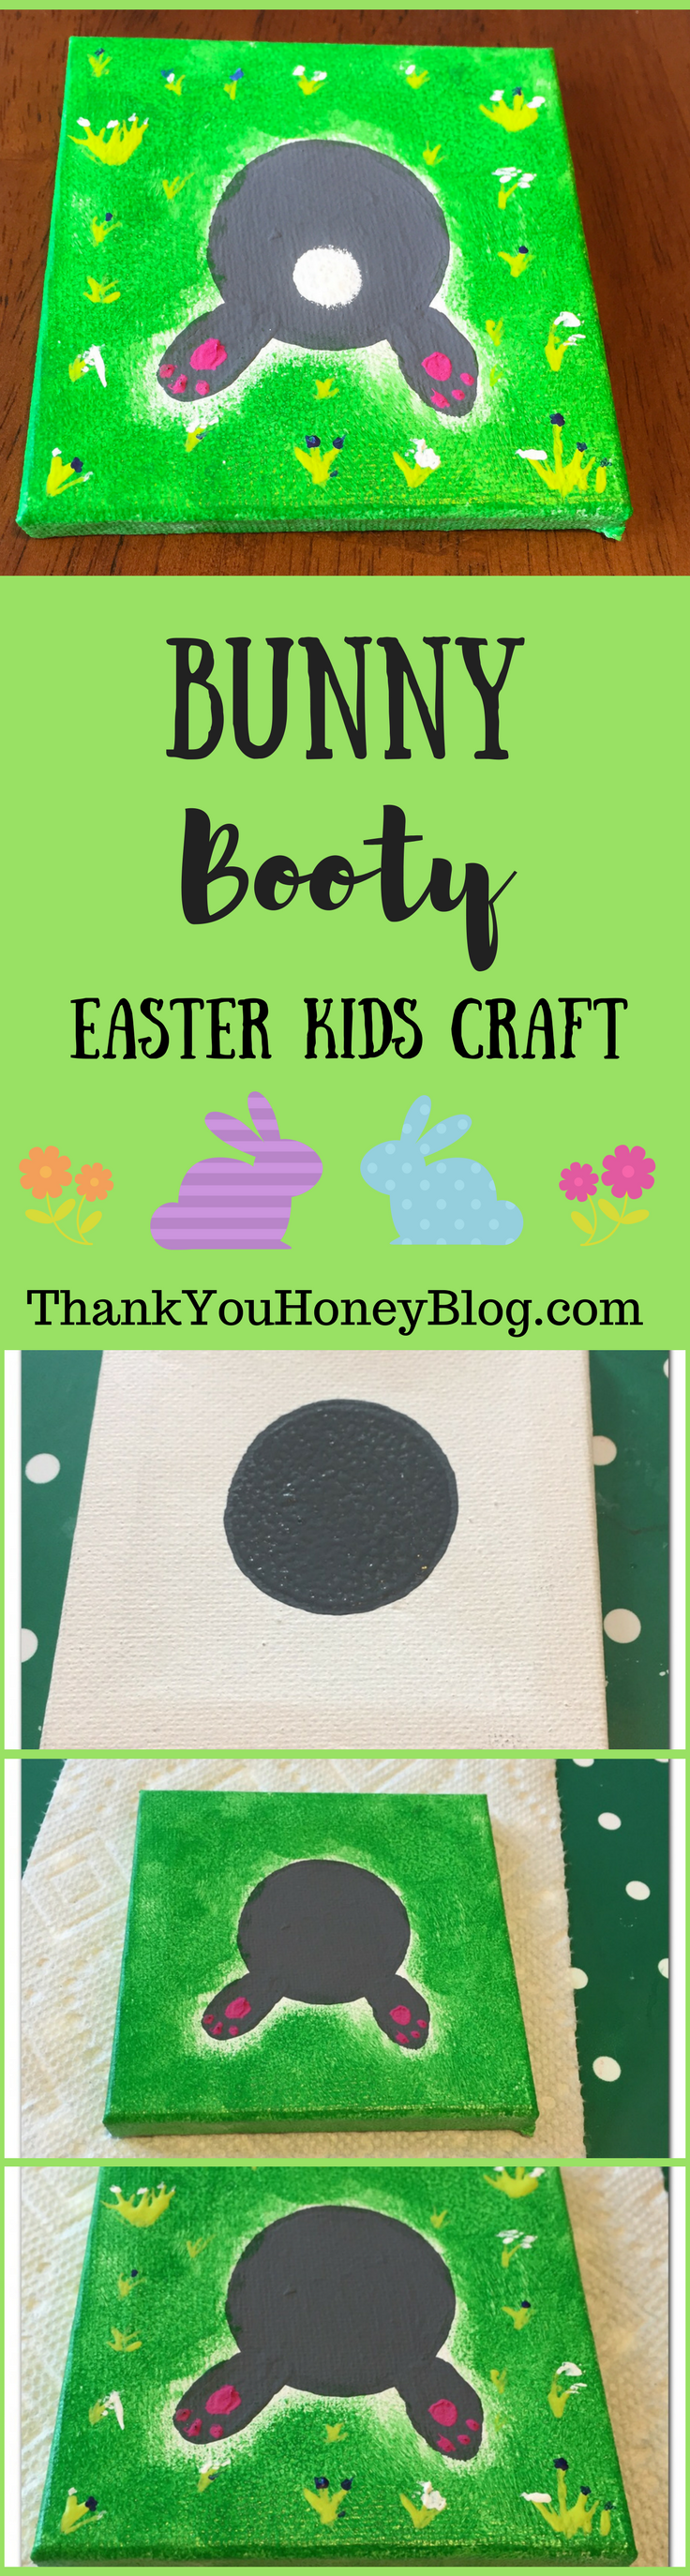 Bunny Booty Easter Kids Craft